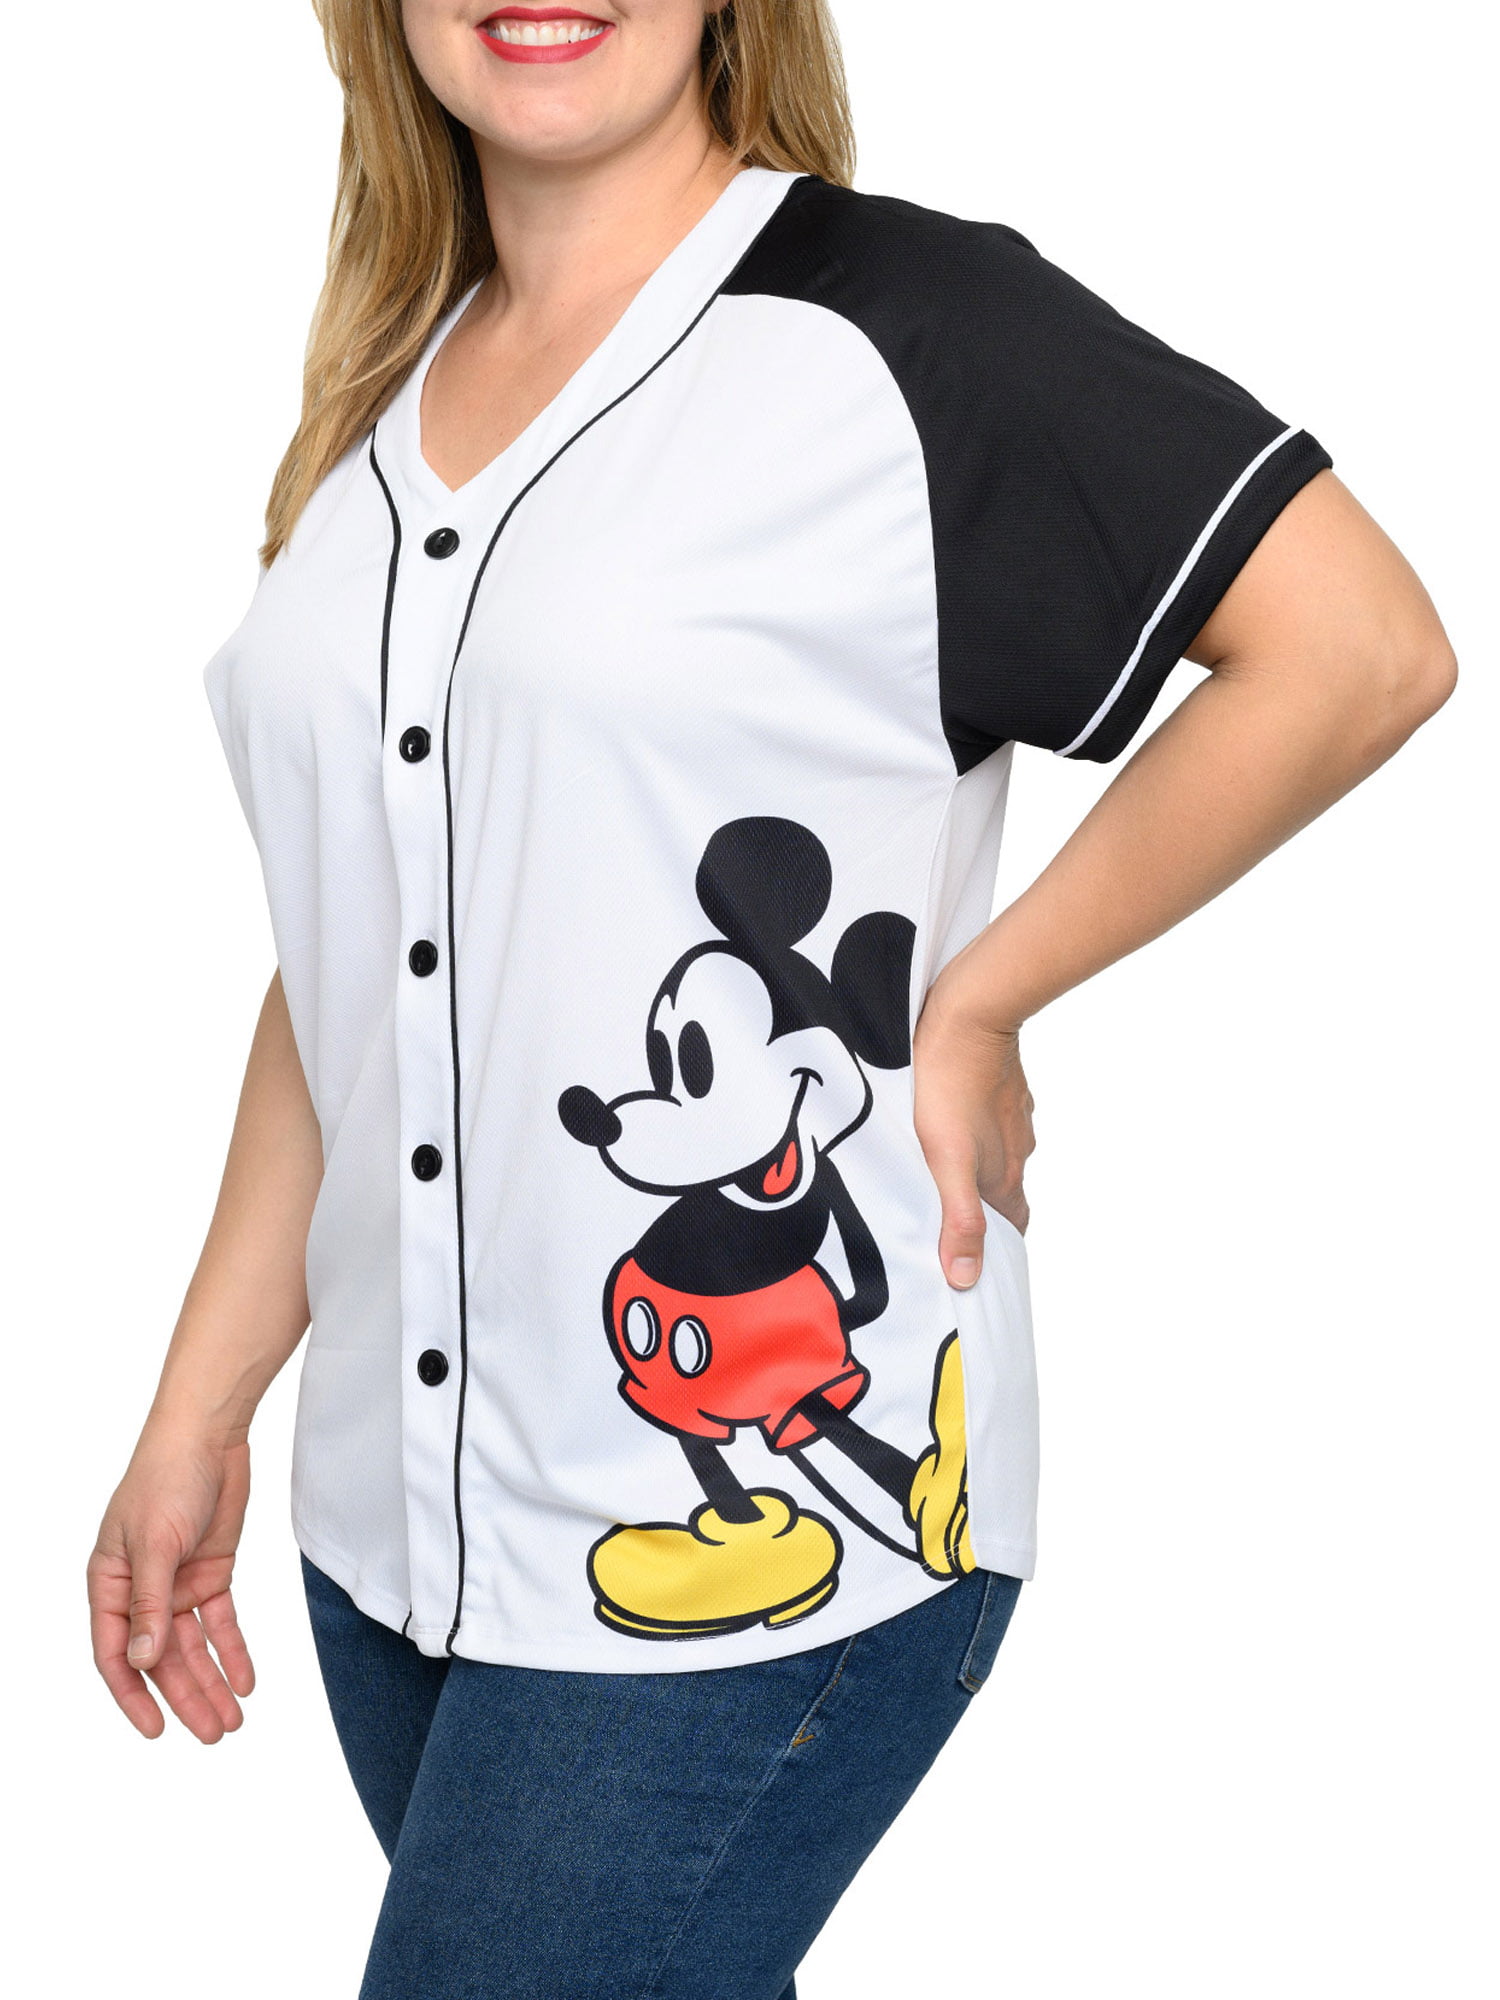 Authentic Disney Apparel Mickey Mouse Baseball Jersey #28 Red White Blue  Size L for Sale in Santa Clarita, CA - OfferUp